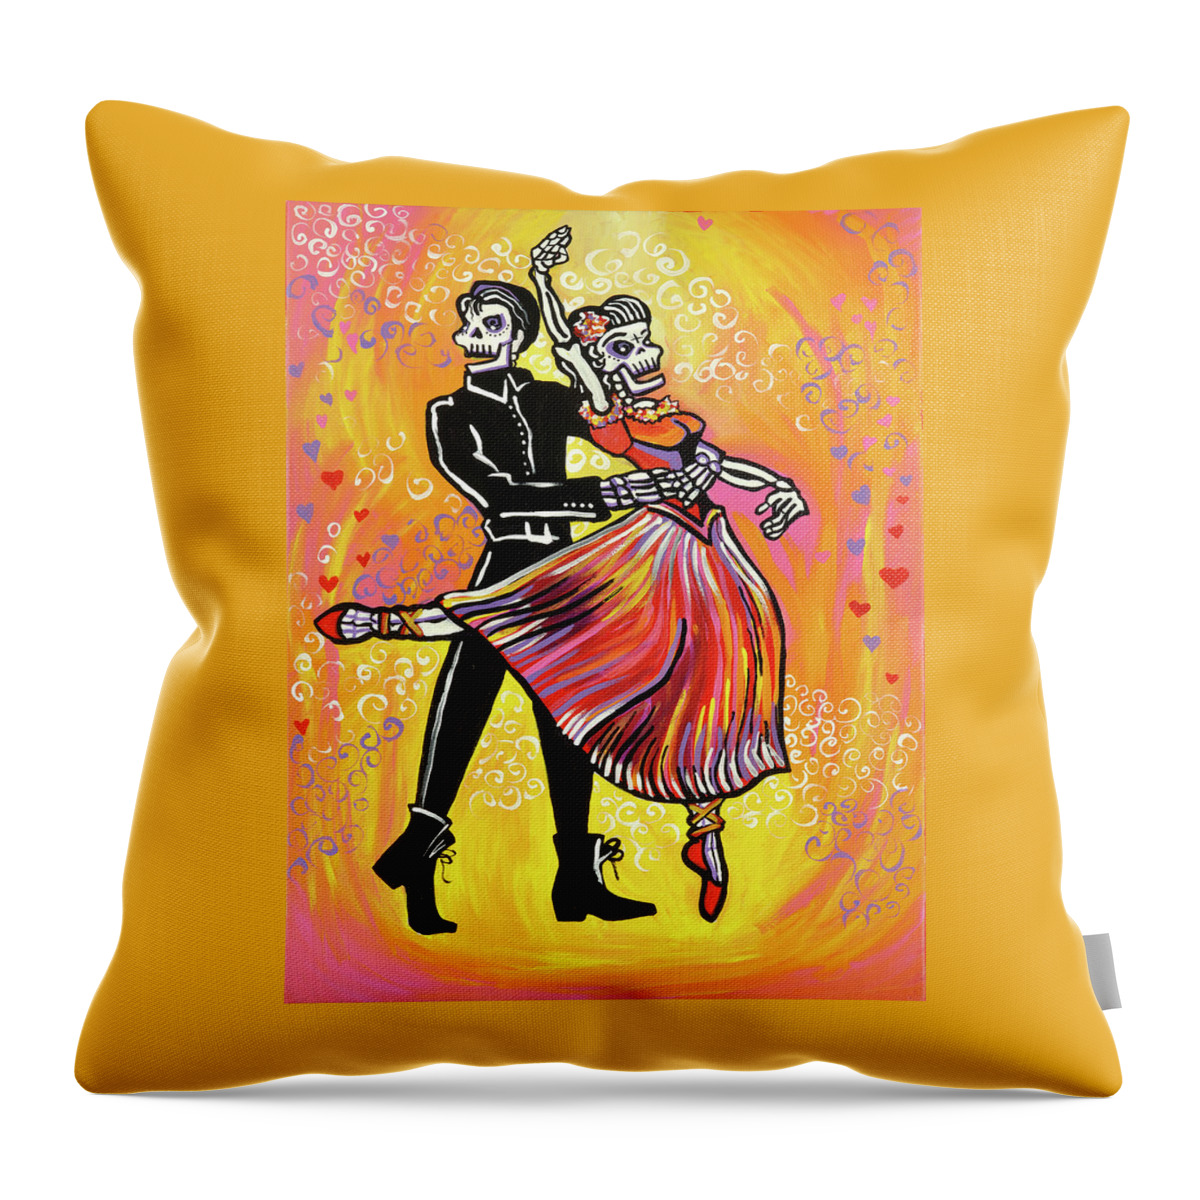 Mardiclaw Throw Pillow featuring the painting Elvis And The Swan by Mardi Claw